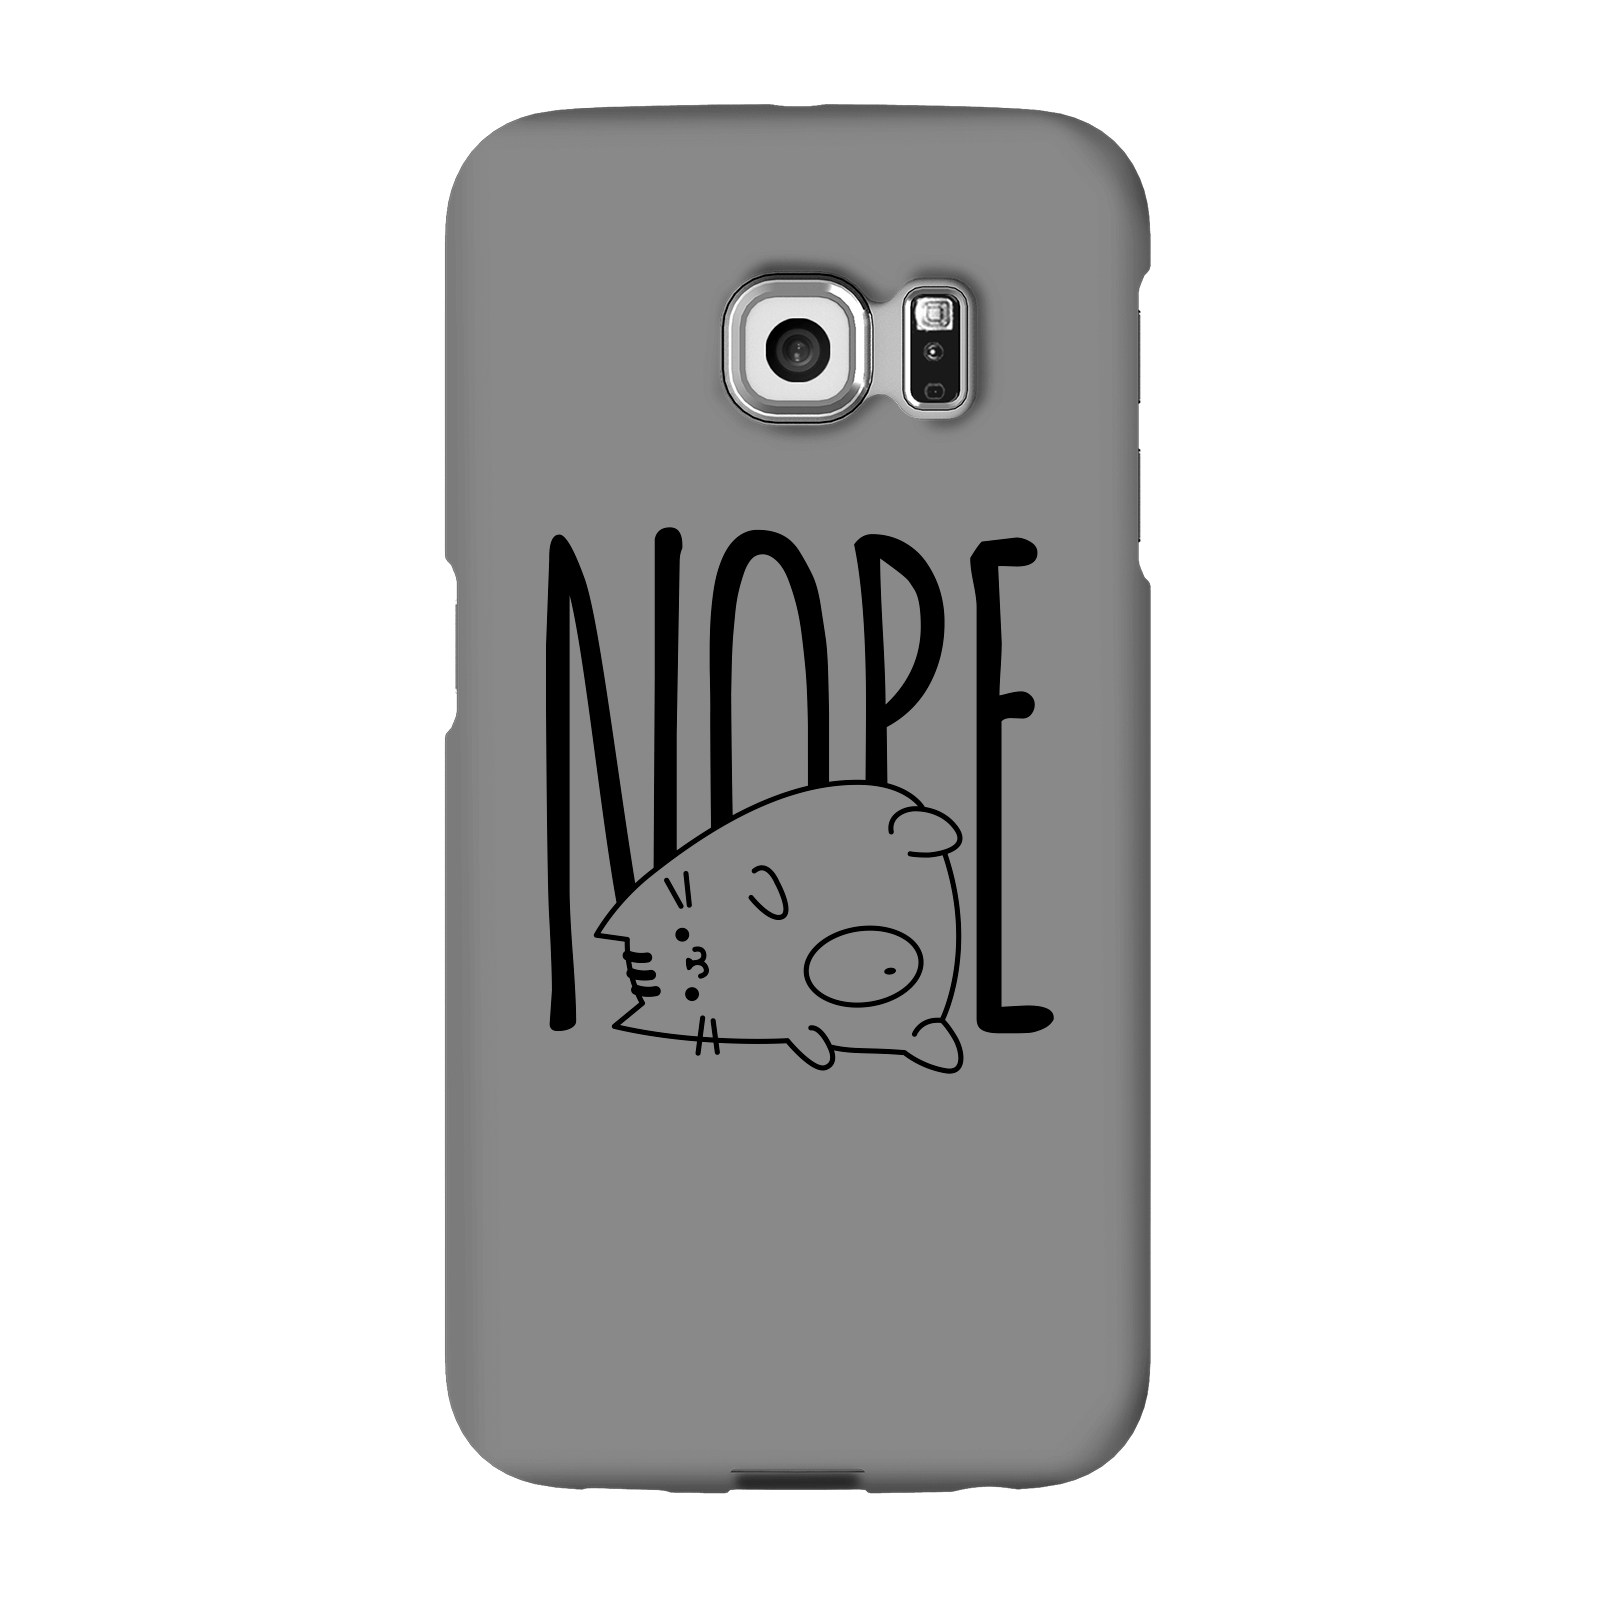 Nope Phone Case for iPhone and Android - Samsung S6 Edge Plus - Snap Case - Gloss